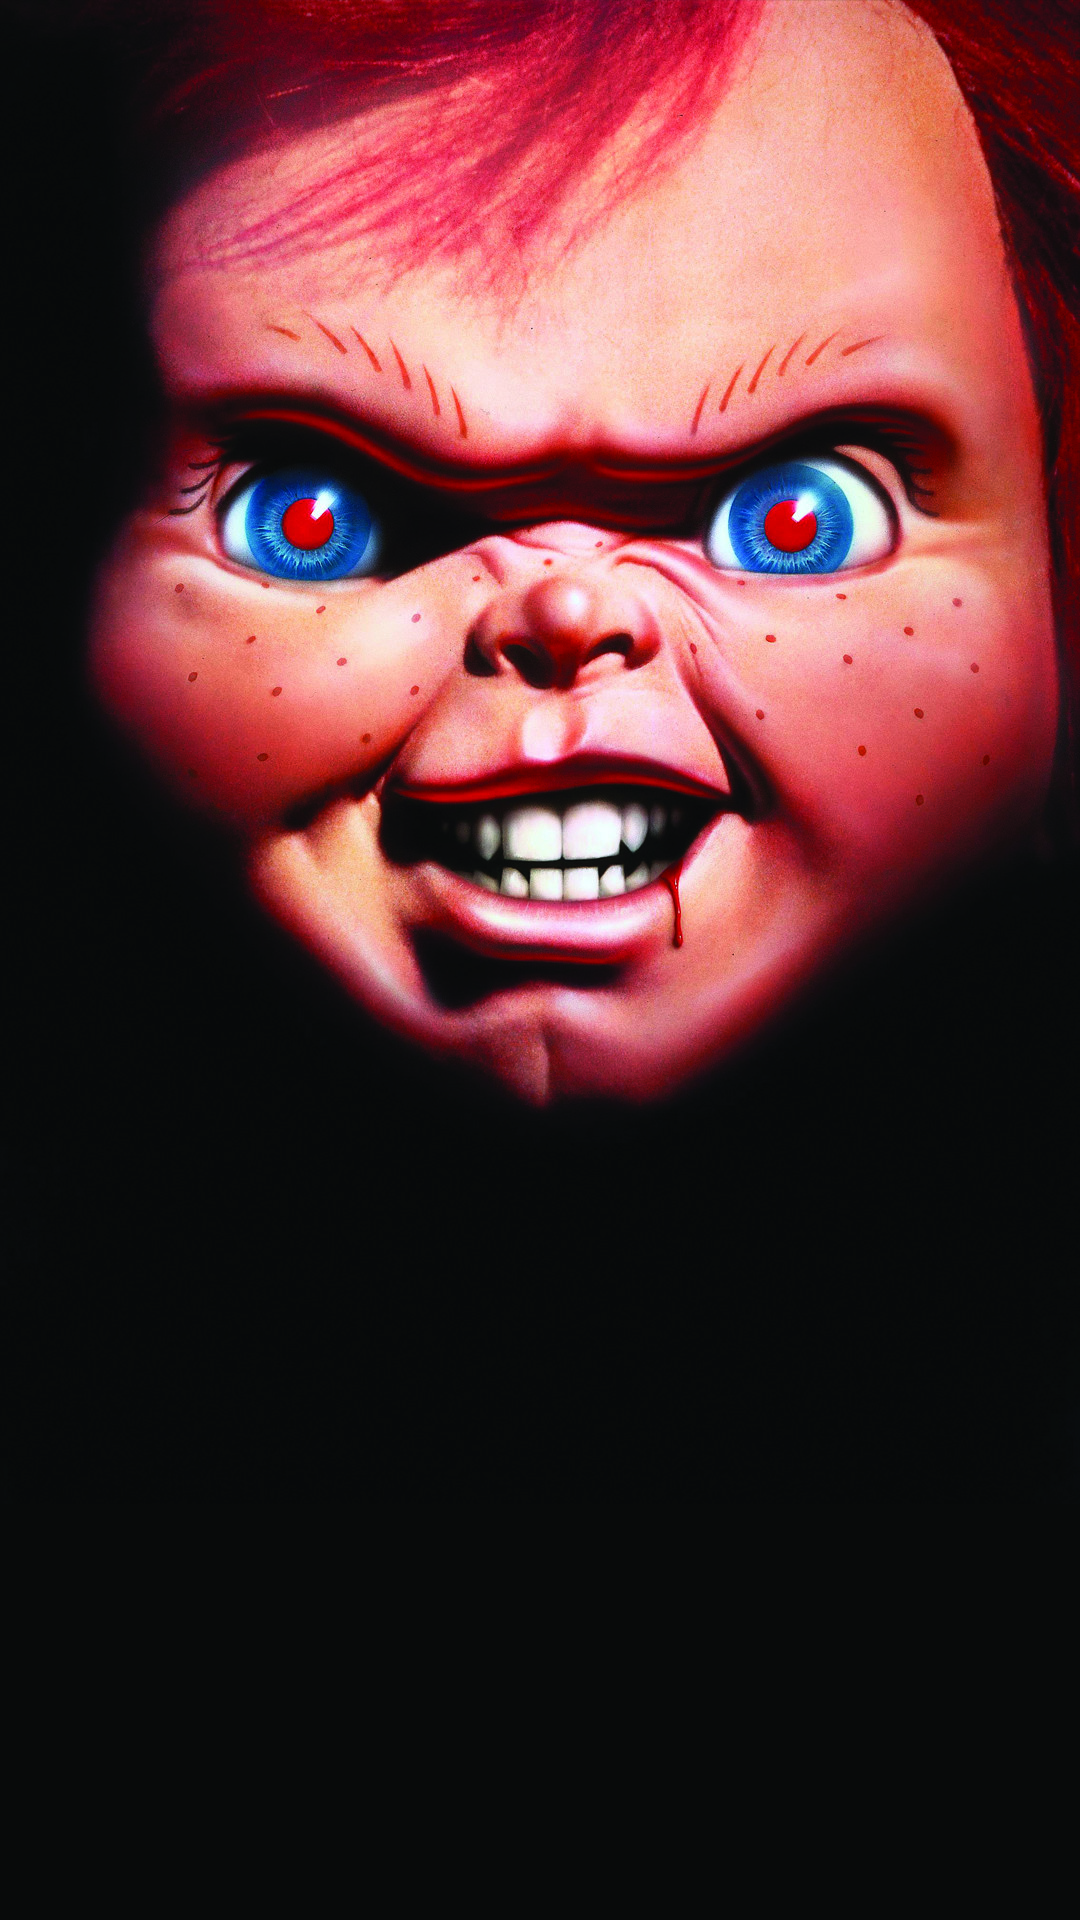 1080x1920 Chucky Scary Doll Android Wallpaper free download